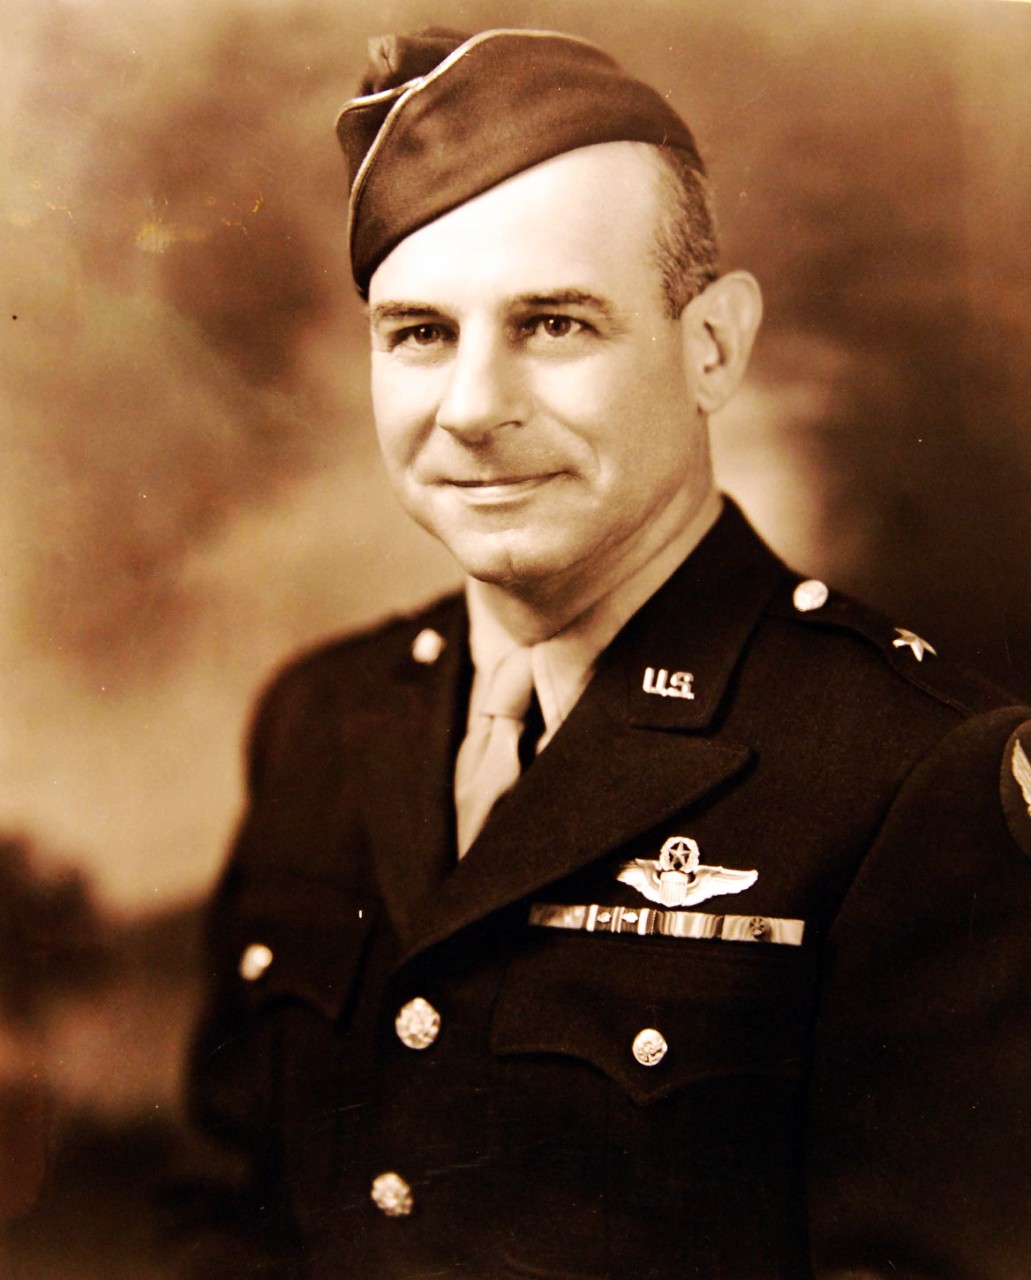 208-PU-52-LL-2:  Brigadier General James H. Doolittle, USAAF.  Note, the Medal of Honor ribbon.    Office of War Information Photograph, now in the collections of the National Archives.  (2017/05/02).